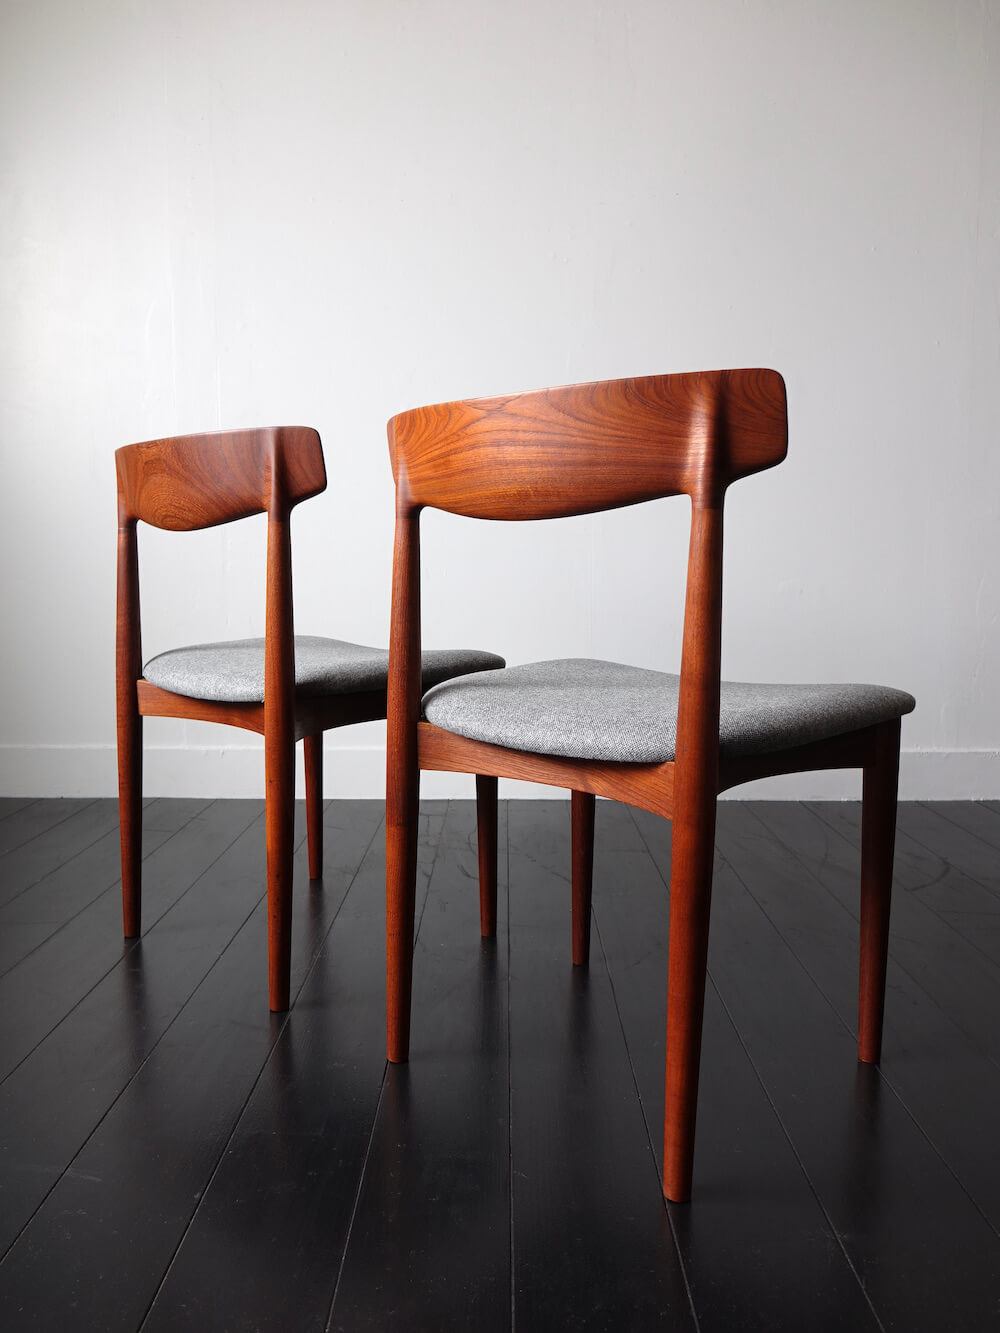 Model.532 Dining chairs by Knud Faerch for Slagelse Møbelvaerk